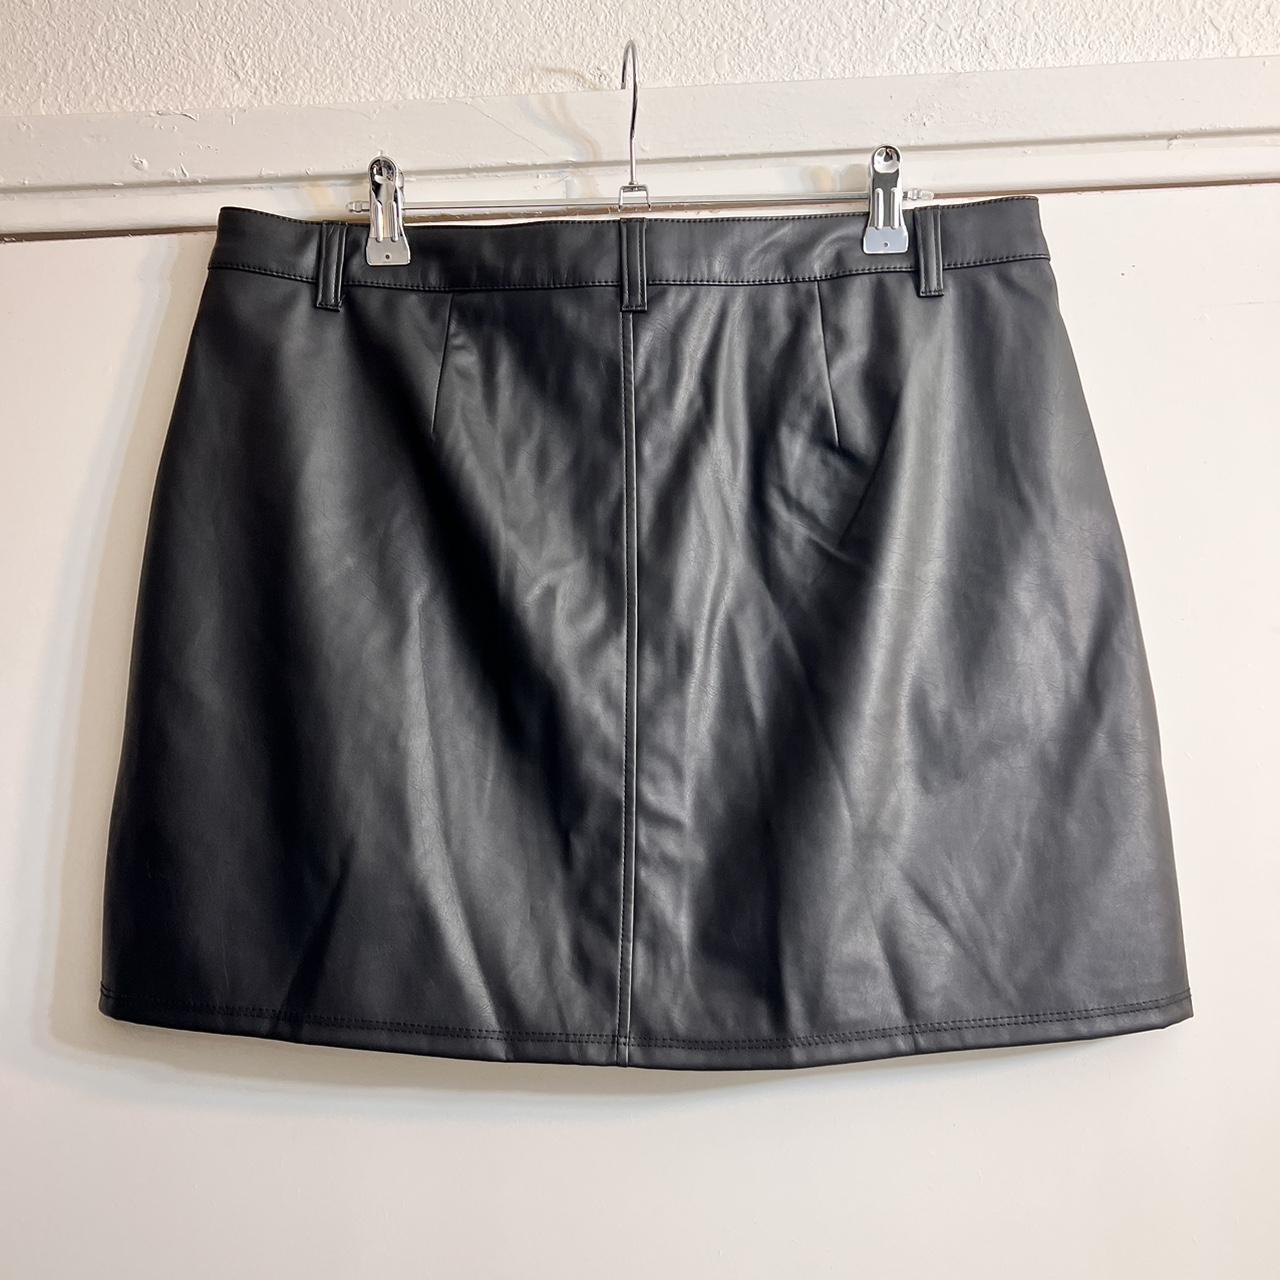 Wild fable leather skirt Never used Size... - Depop